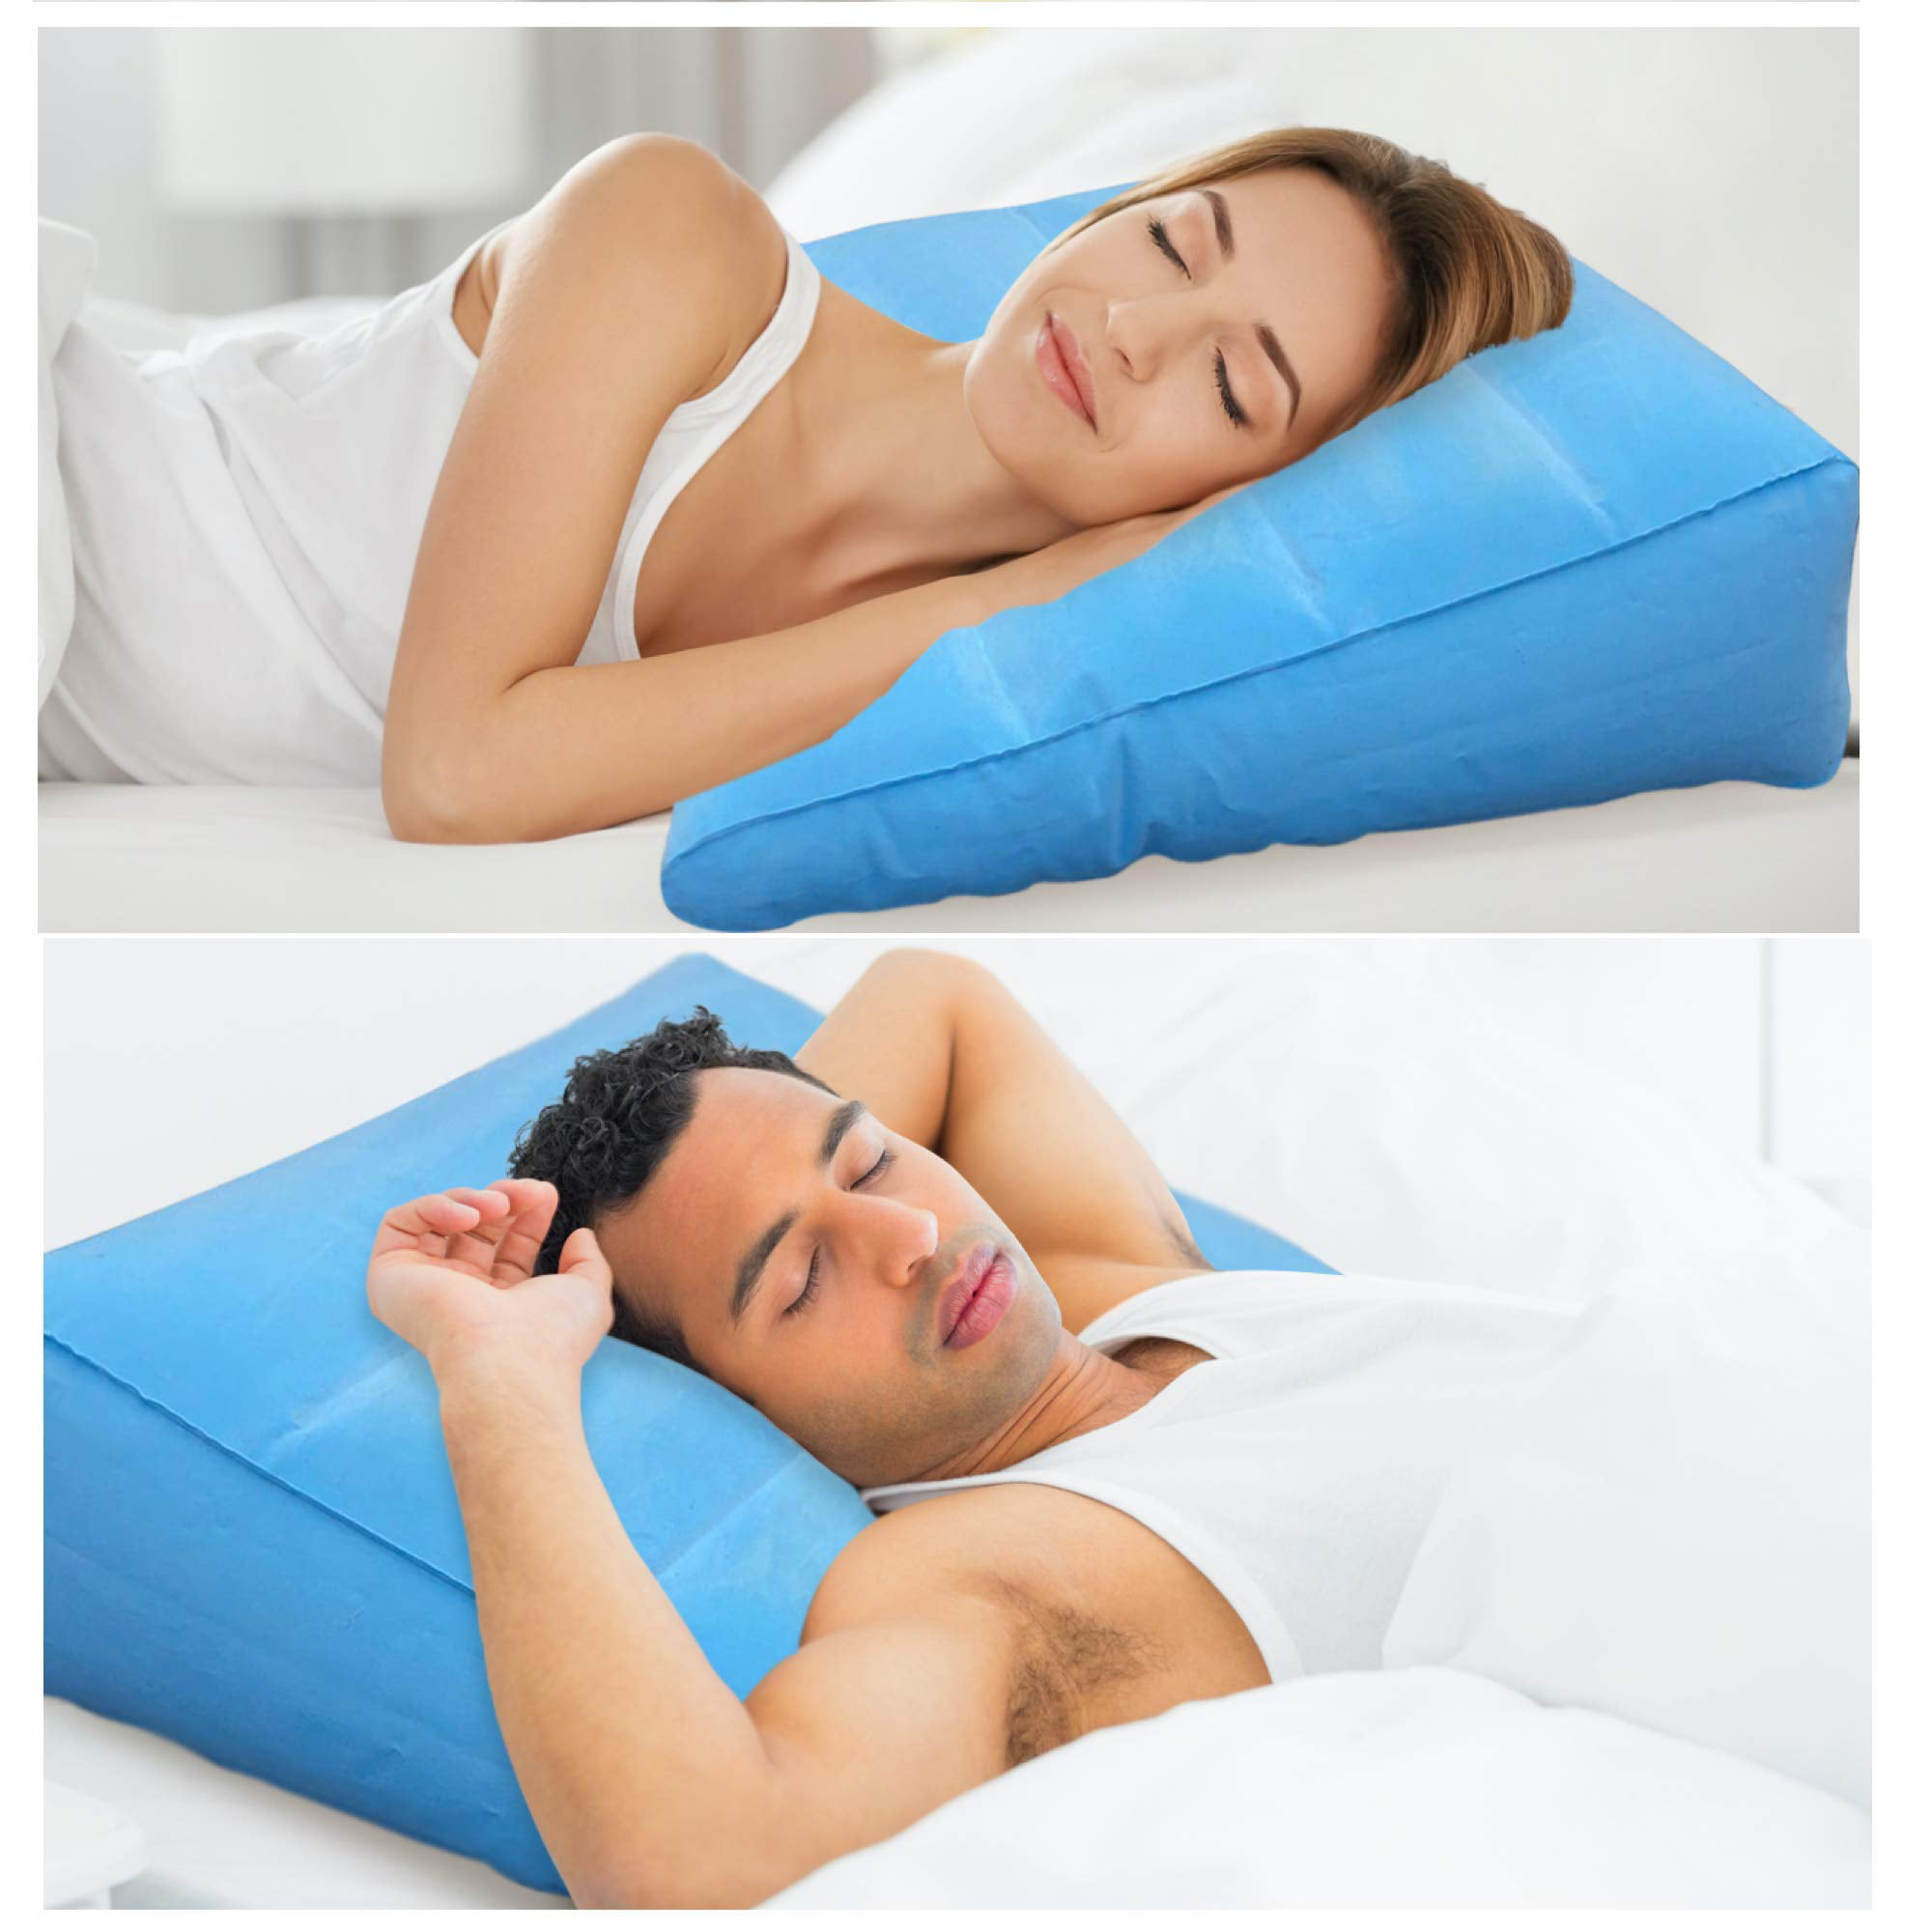 Beauare Smoothspine Alignment Pillow - Relieve Hip Pain & Sciatica